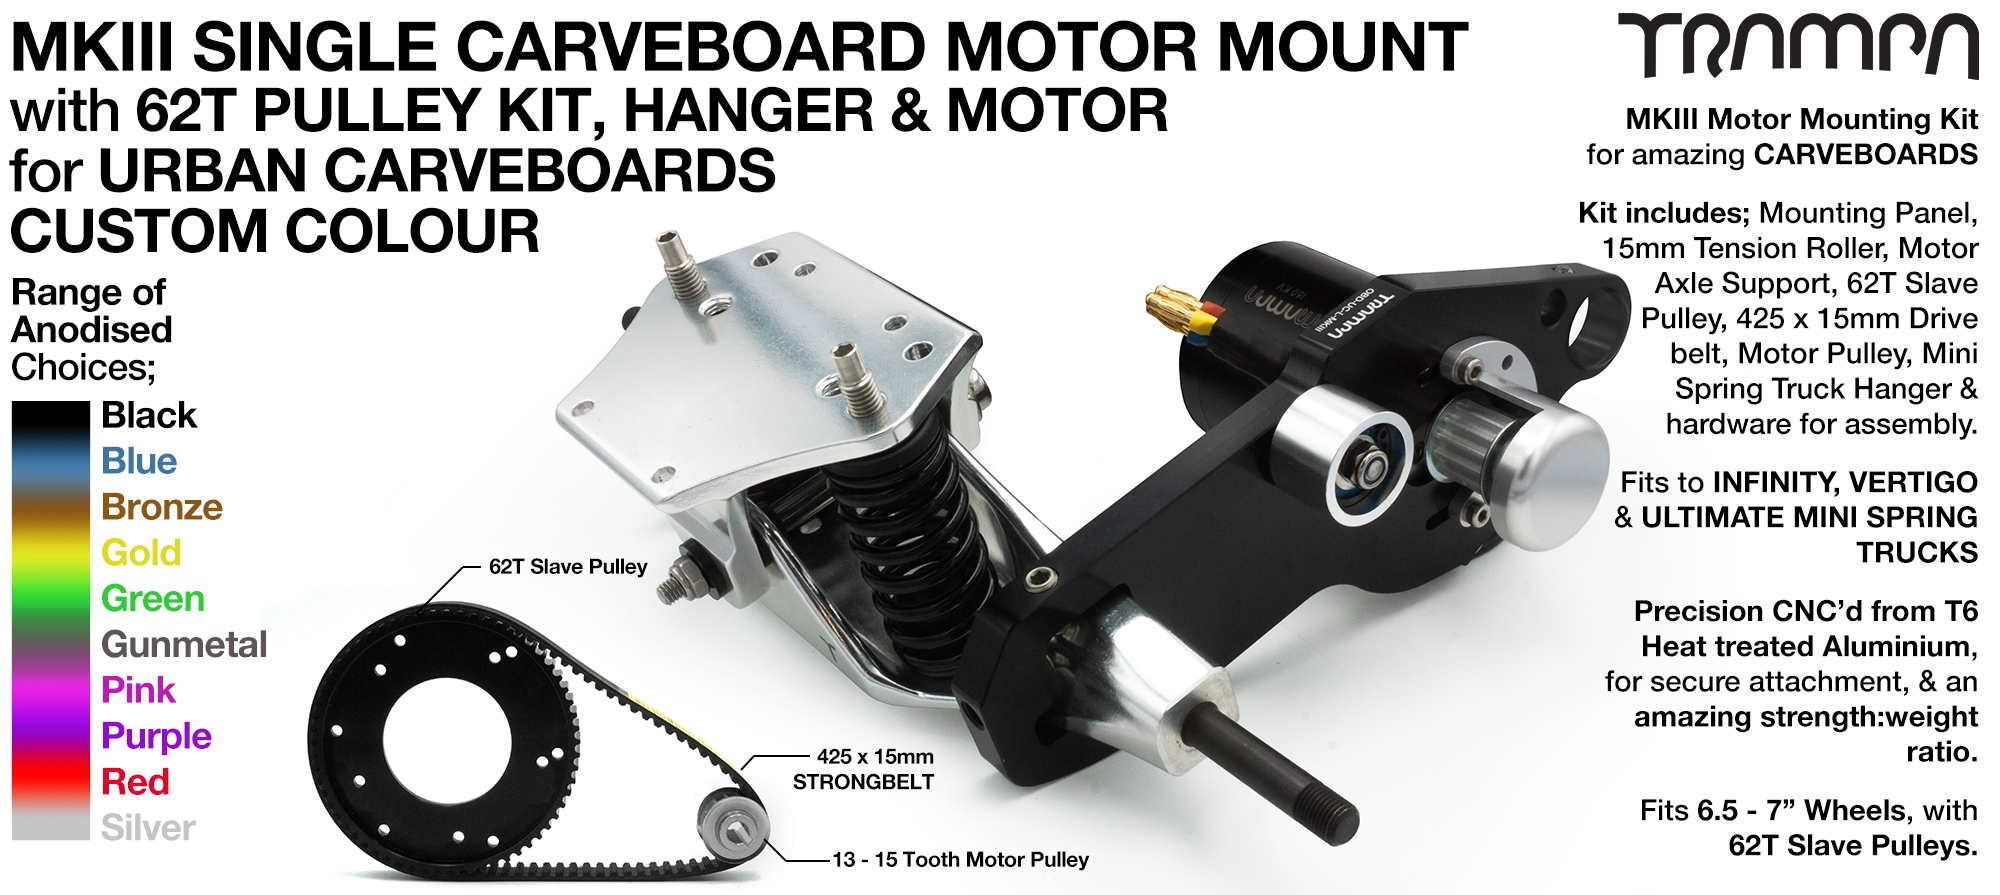 MkIII URBAN CARVEBOARD Motormount on a TRUCK with 44 Tooth Pulley Kit & Motor - SINGLE